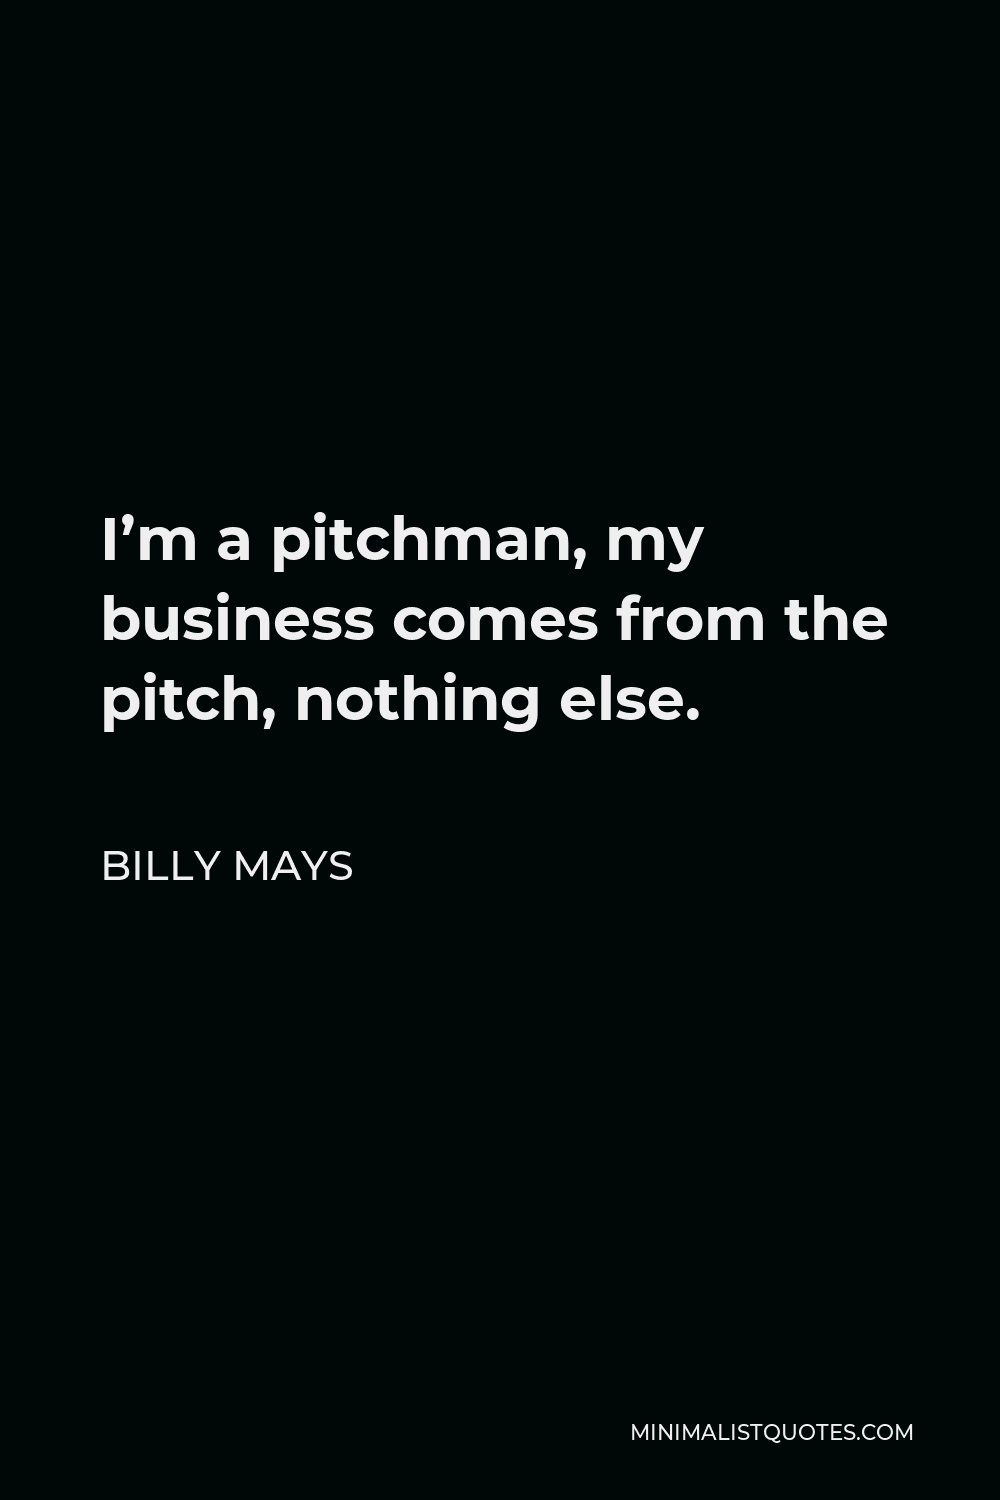 Billy Mays Quote - I’m a pitchman, my business comes from the pitch, nothing else.